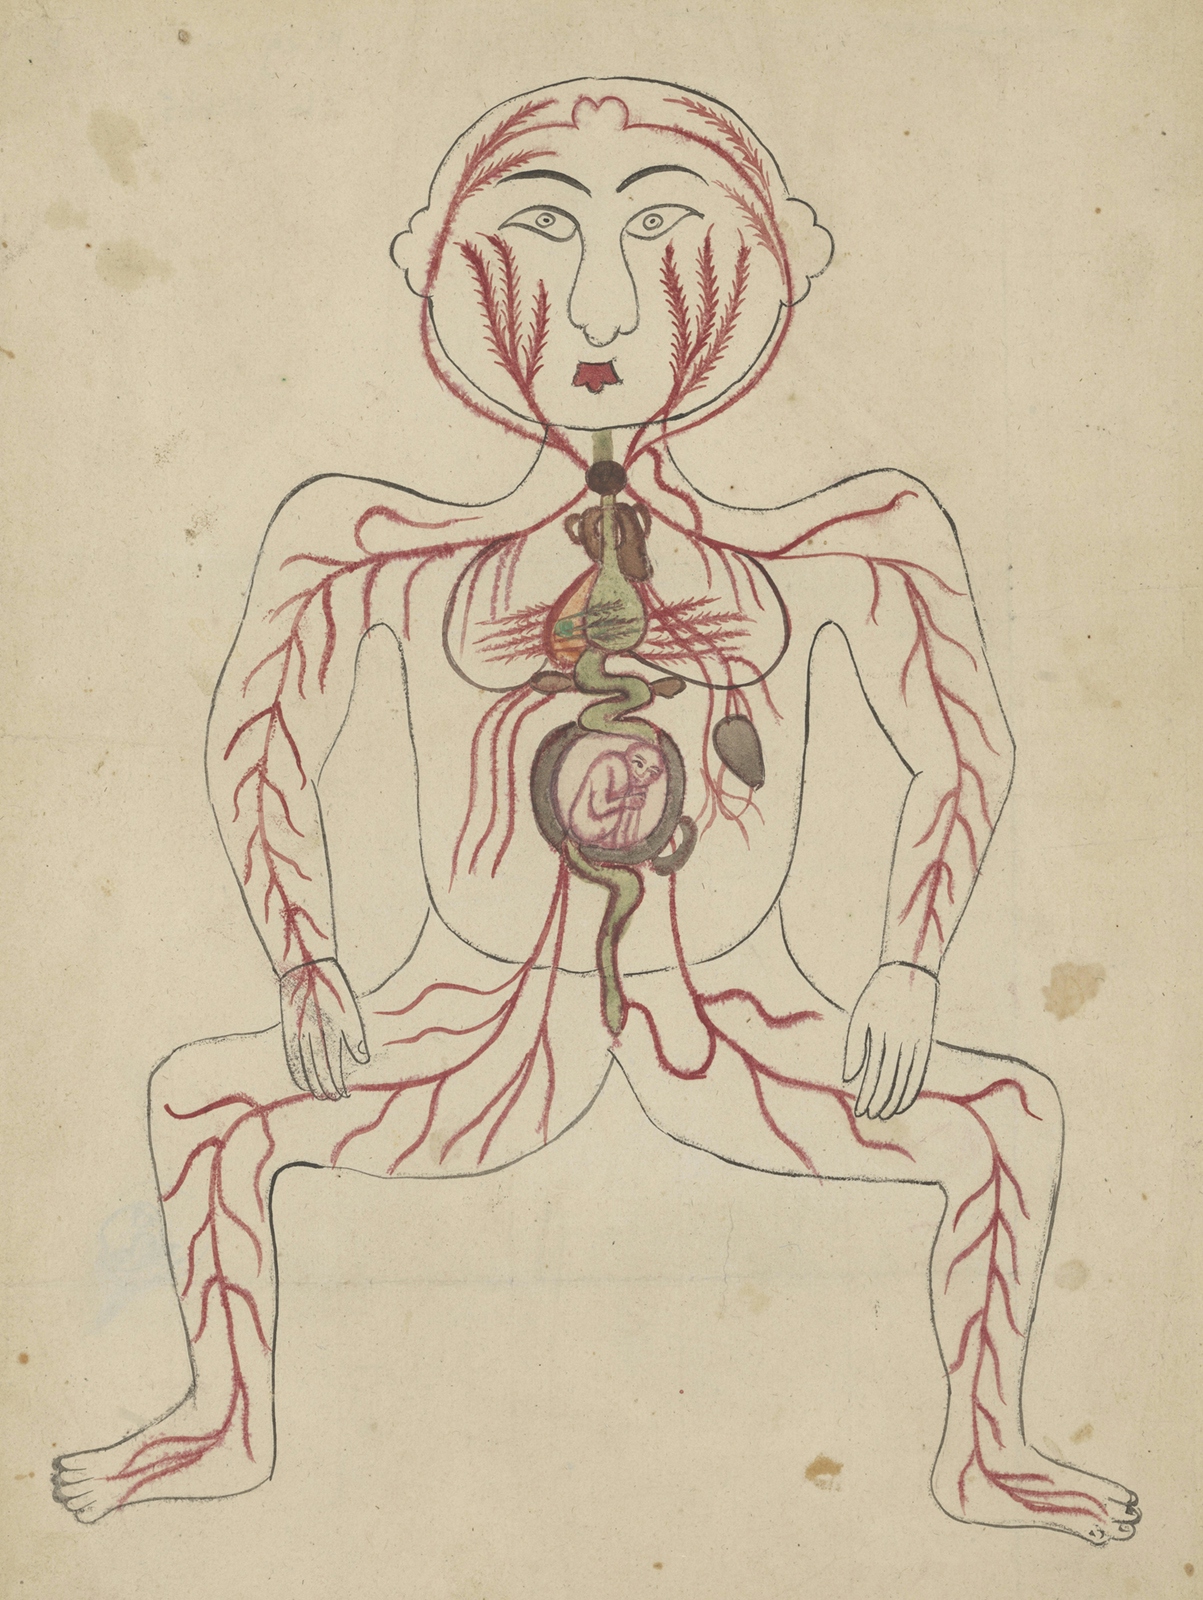 Colour drawing showing the outline of a woman face on, with the arteries and veins marked out in red, some of the vital organs, and a foetus in the centre of the body.